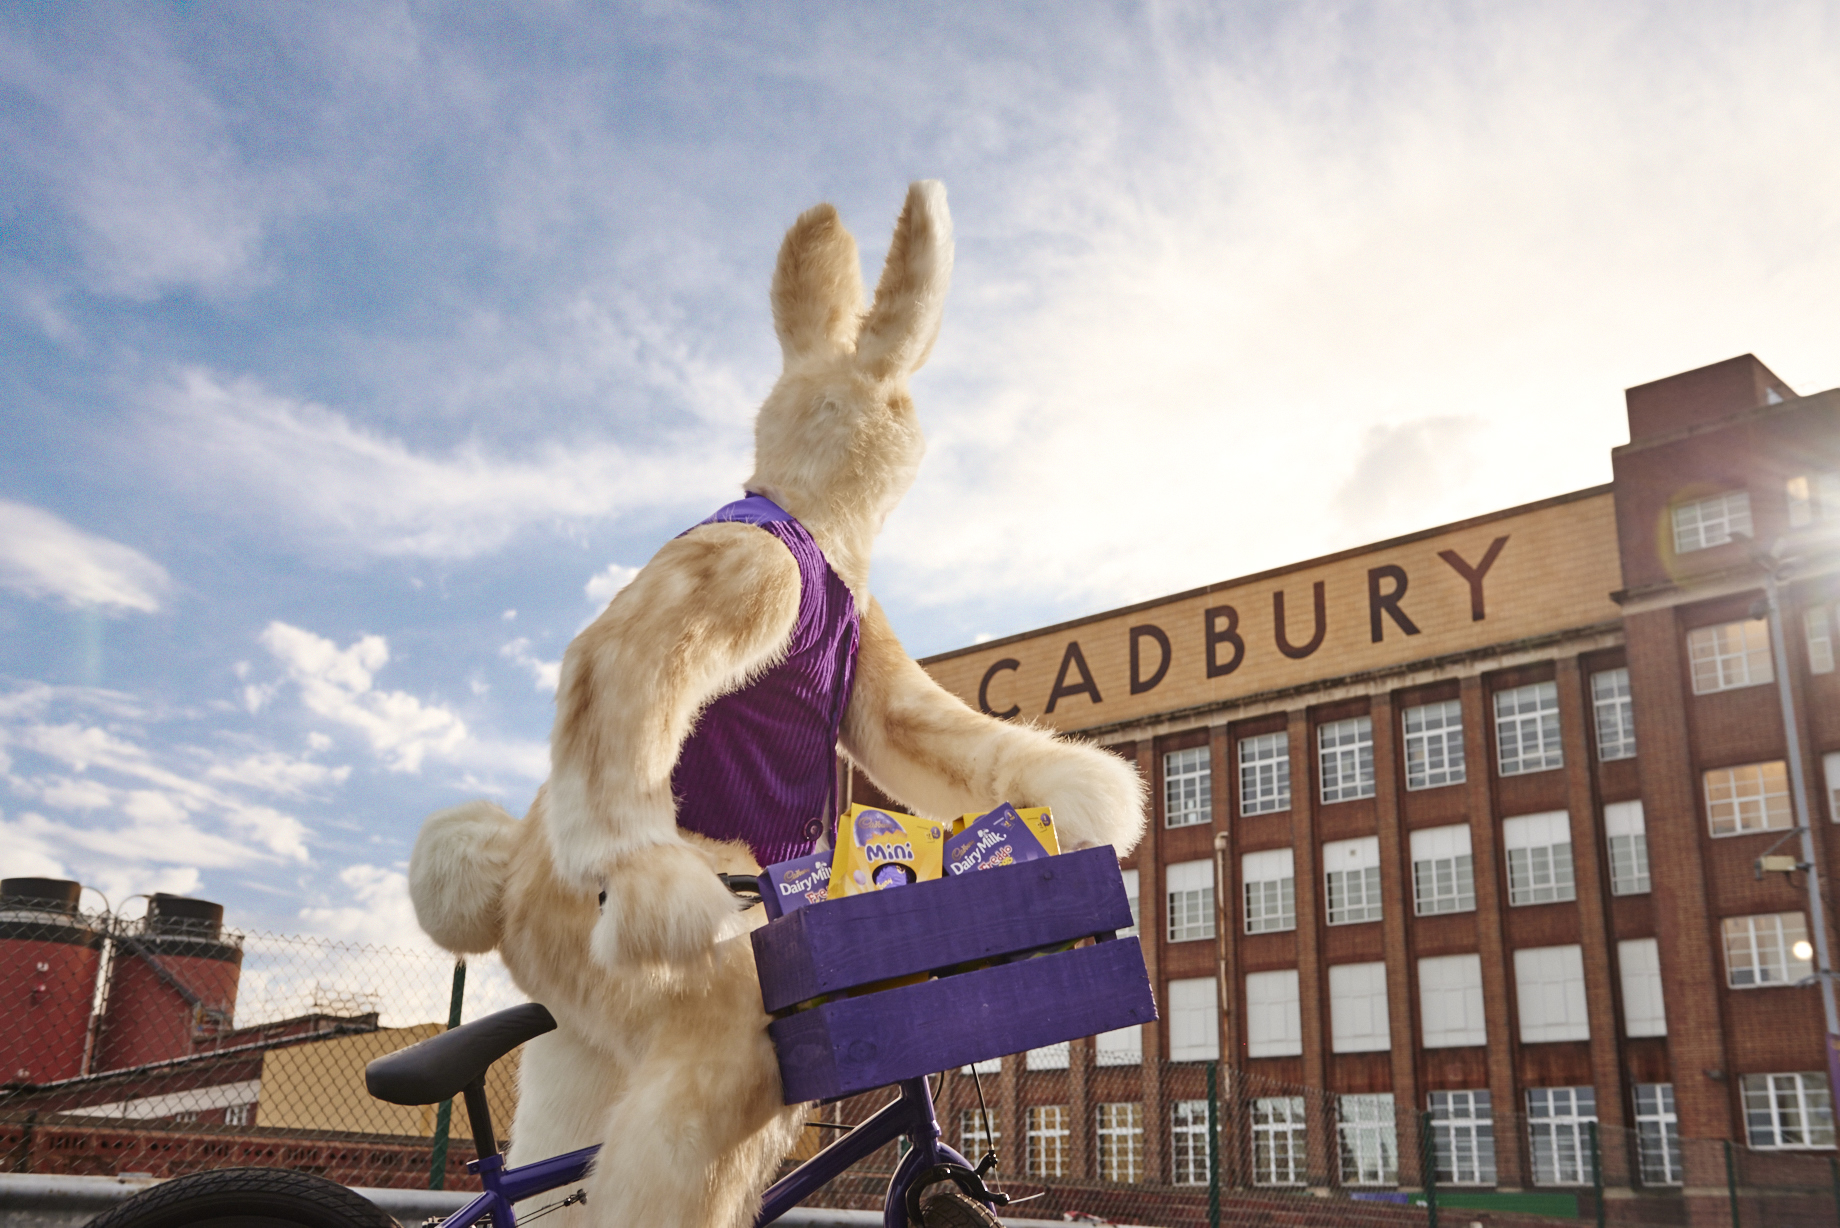 The Cadbury Easter Bunny sets off from Bournville to deliver joy to the nation in the lead-up to the Easter weekend